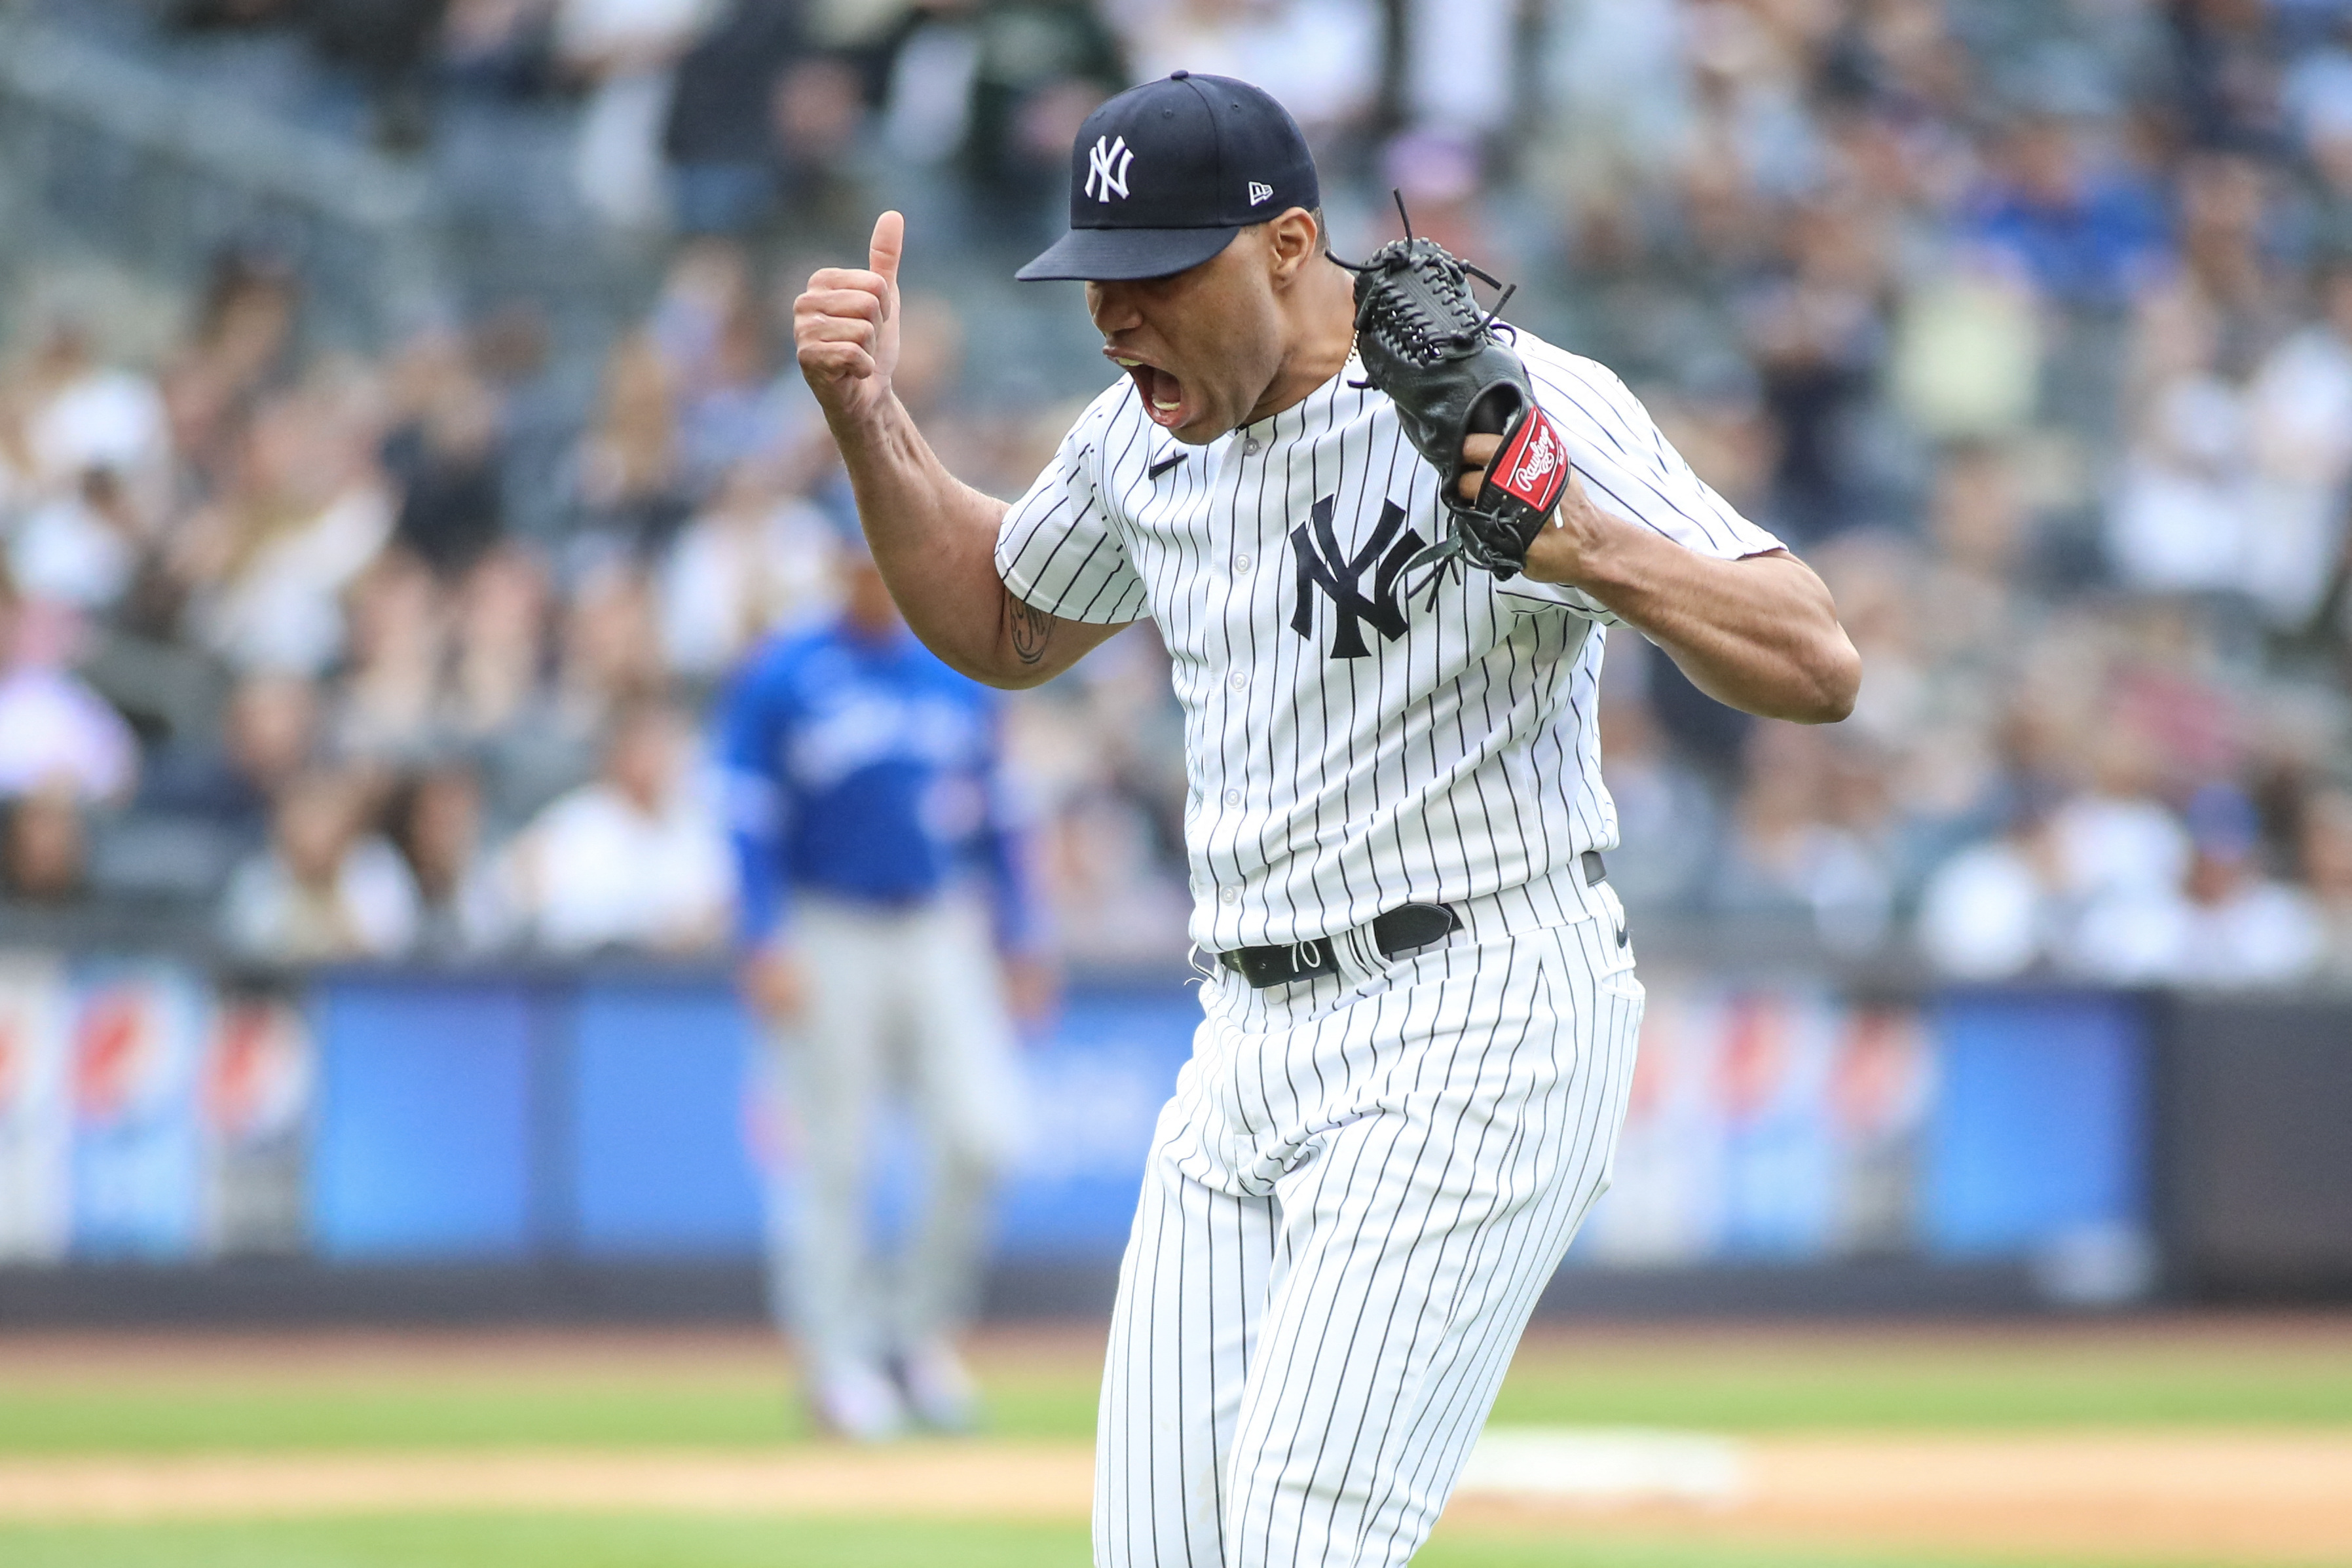 MLB wrap: Yankees top Athletics with walkoff home run from DJ LeMahieu